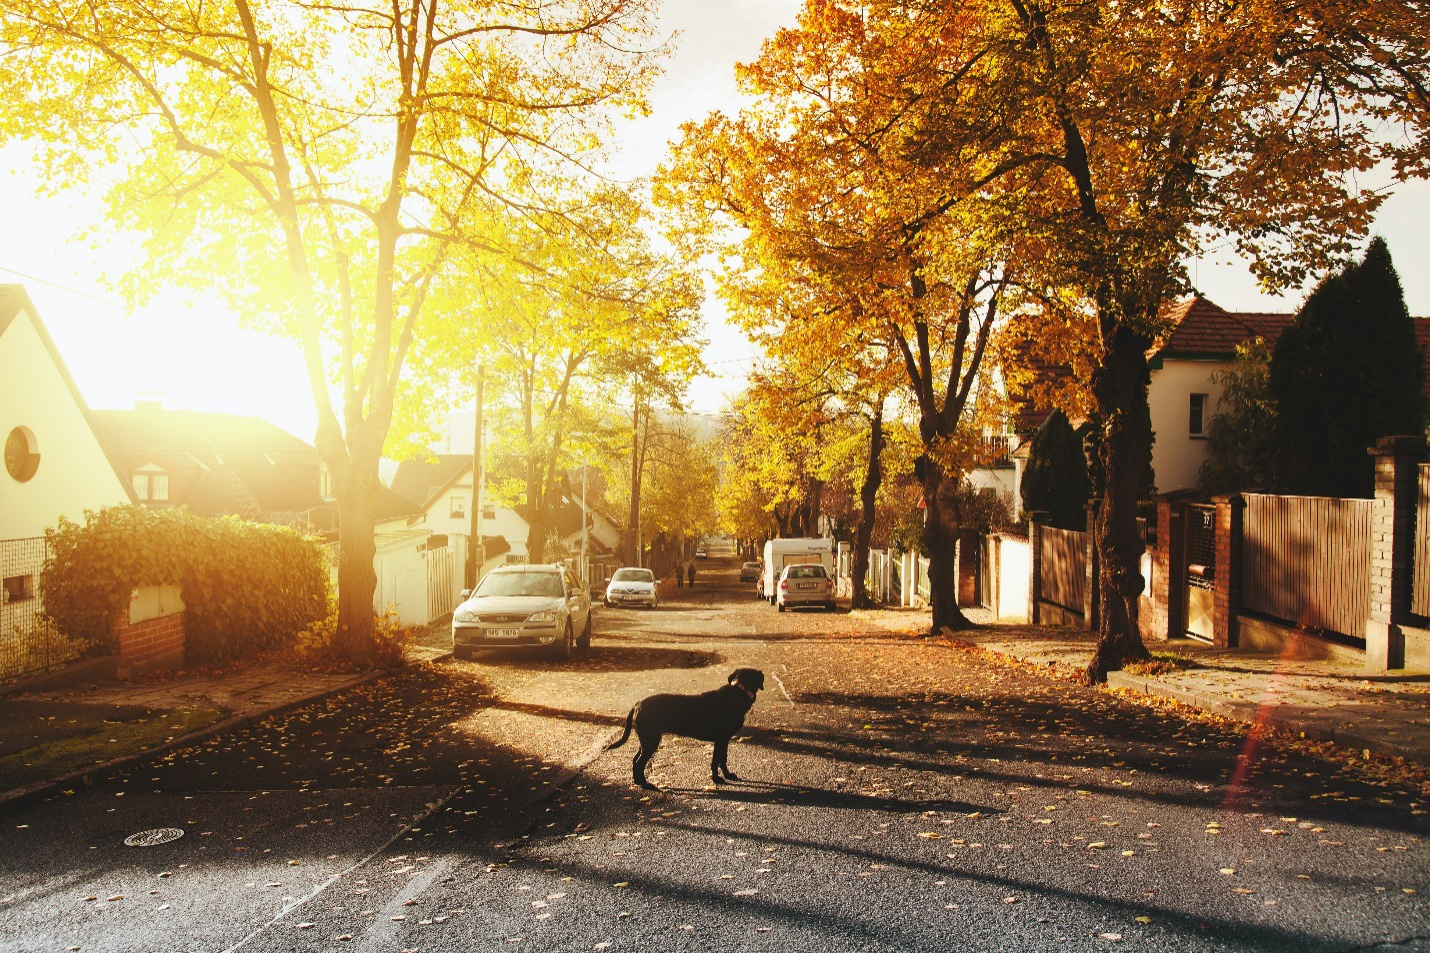 A dog stands alone in the street